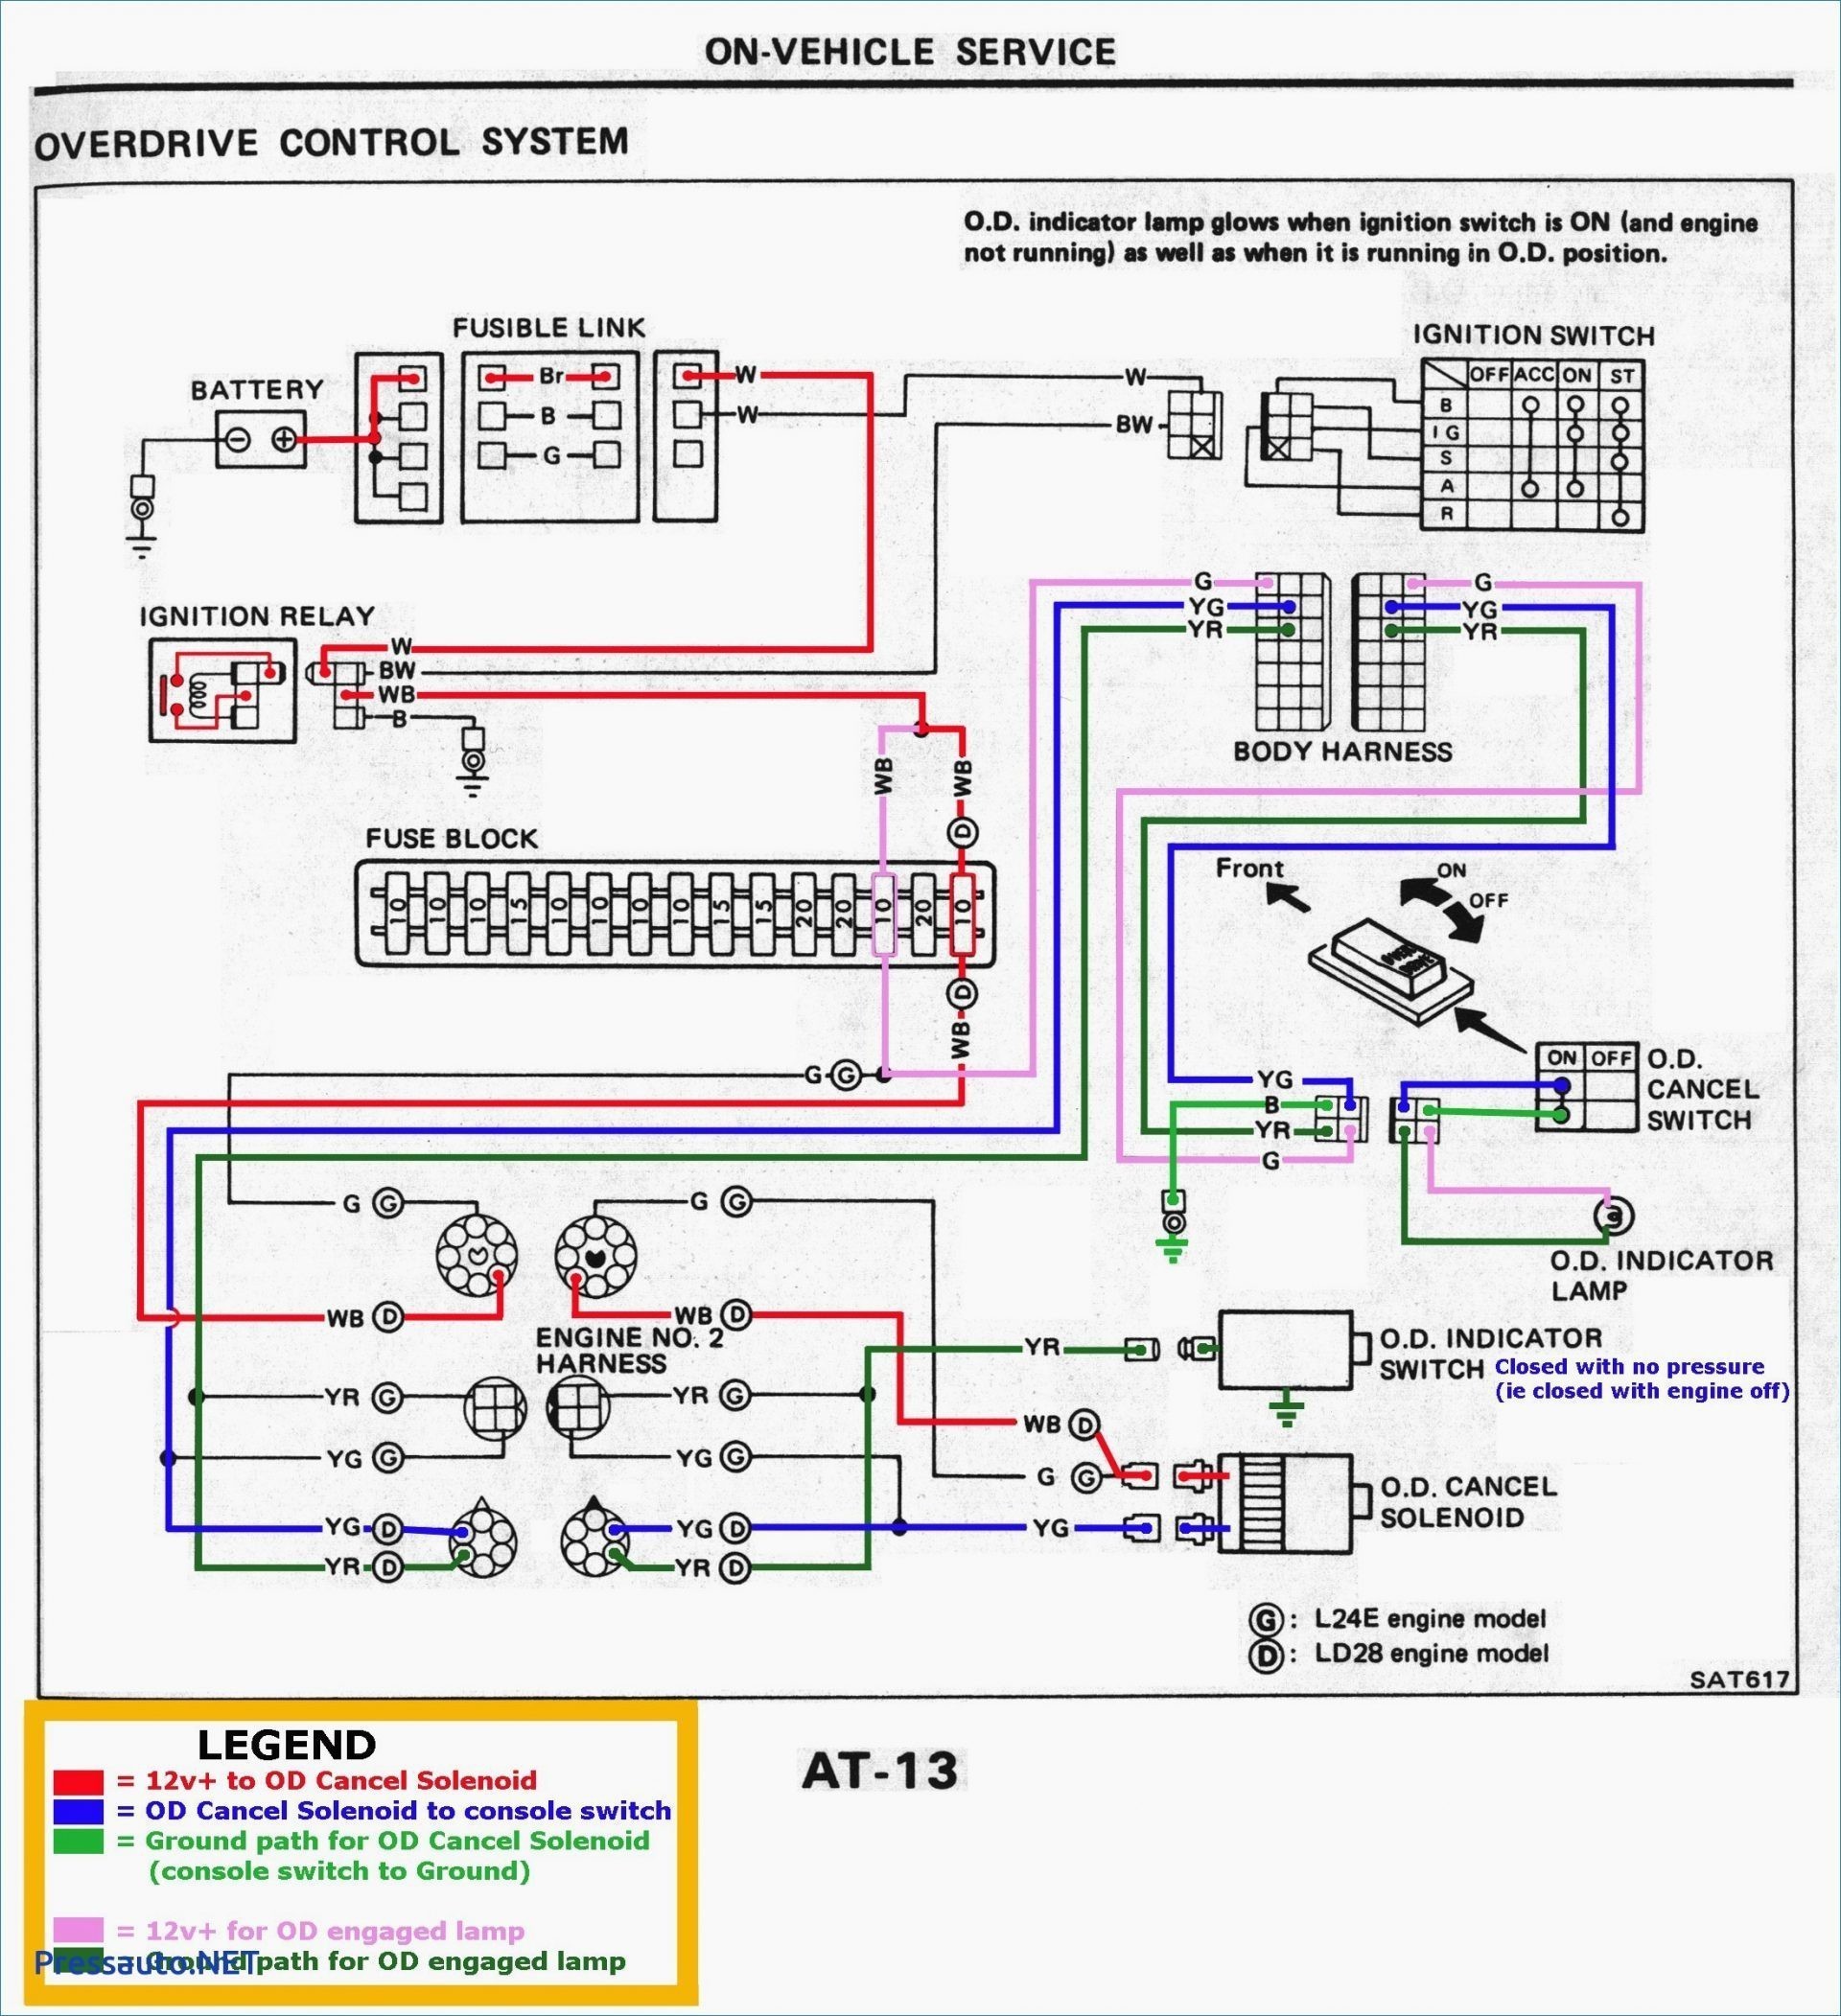 Line Diagram House Wiring Valid Basic House Wiring Diagram Best House Electrical Wiring Diagram